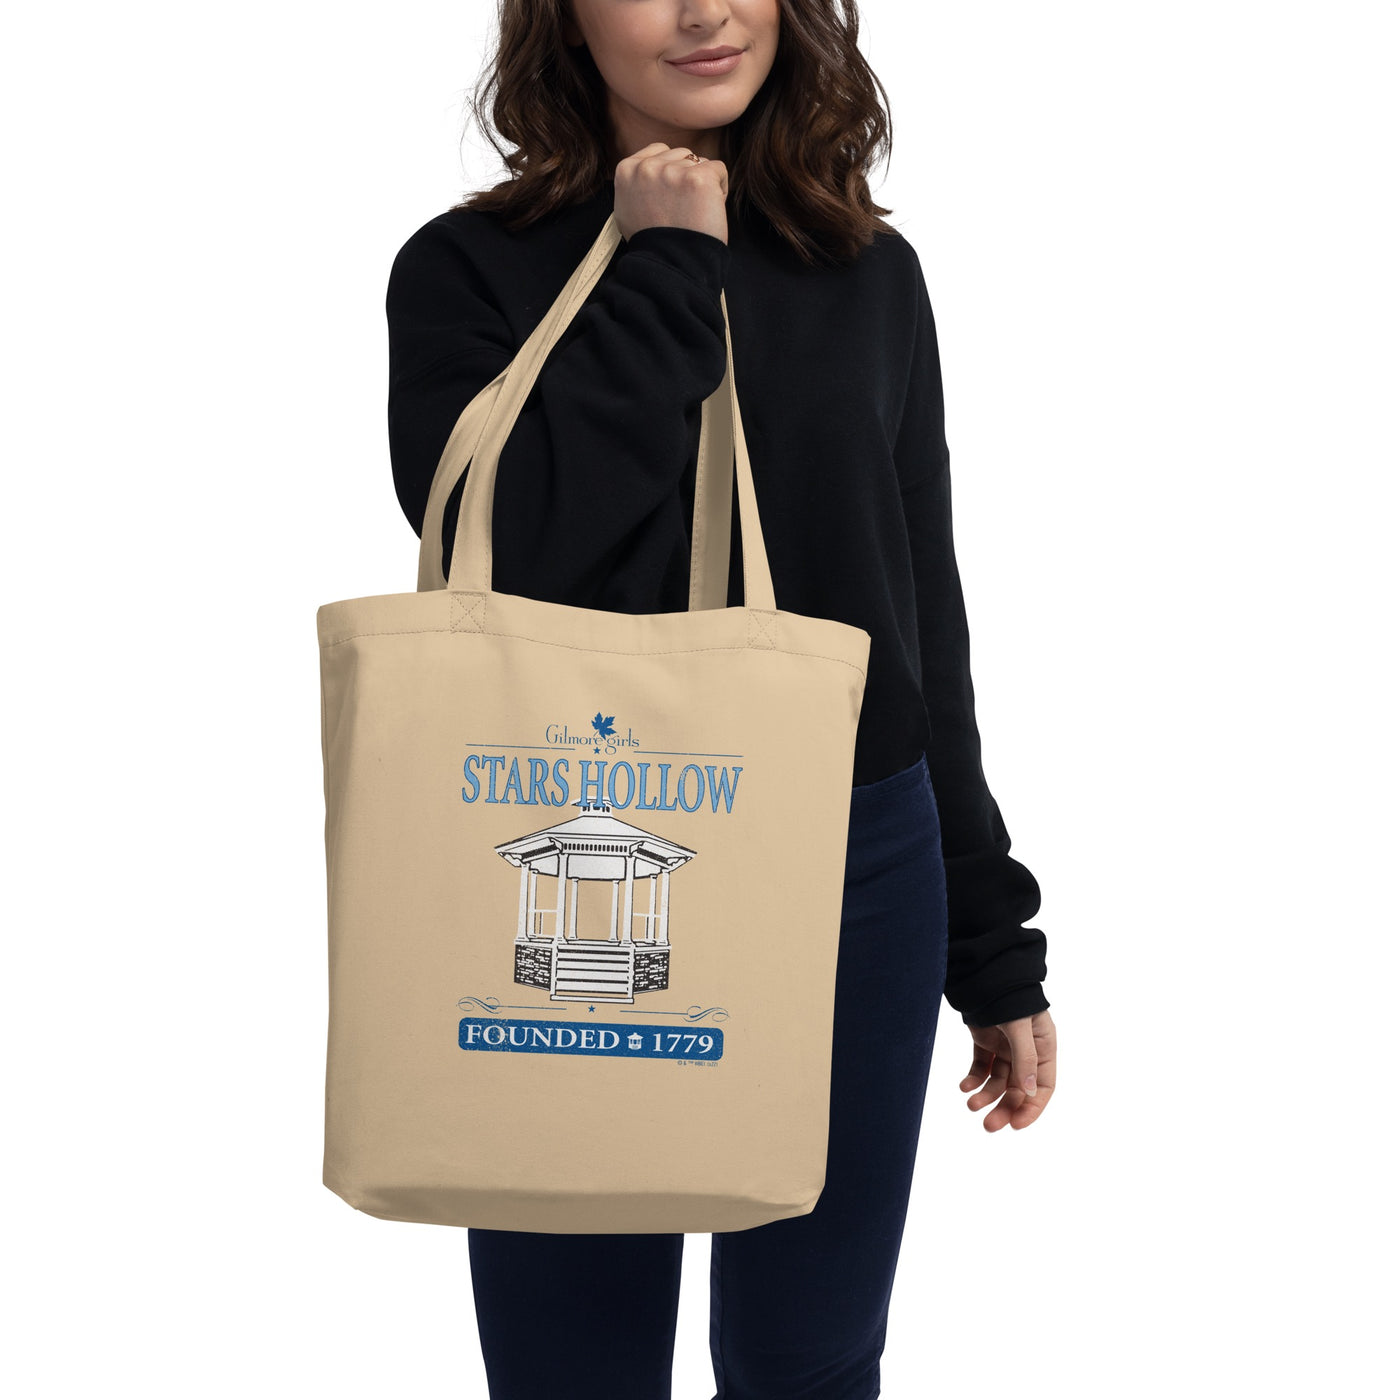 Gilmore Girls Stars Hollow Eco Tote Bag